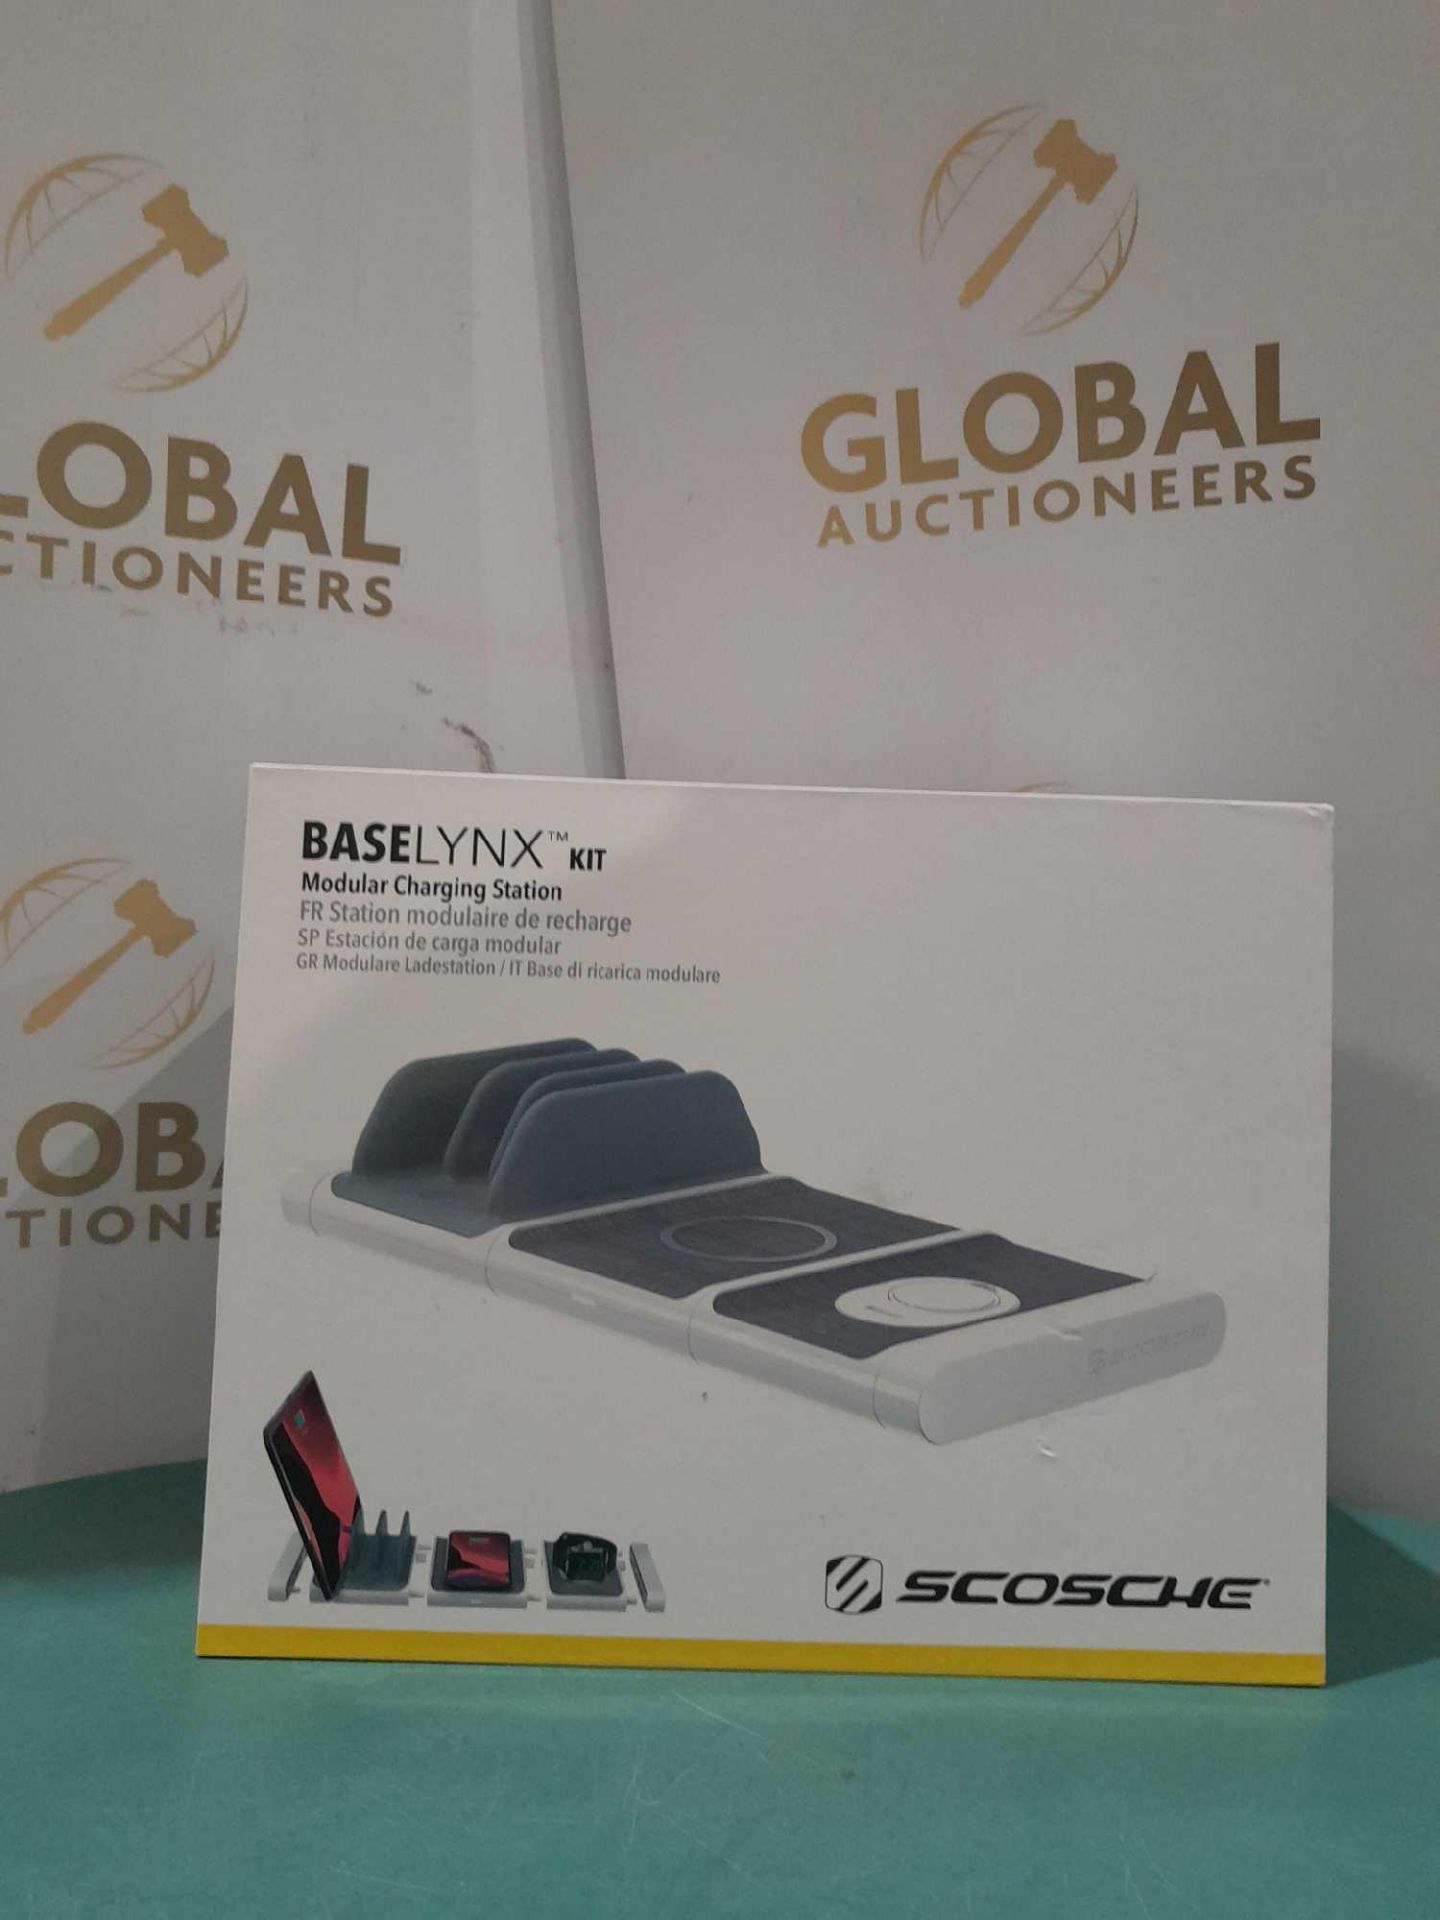 RRP £140 Boxed Scosche Baselynx Modular Charging Station